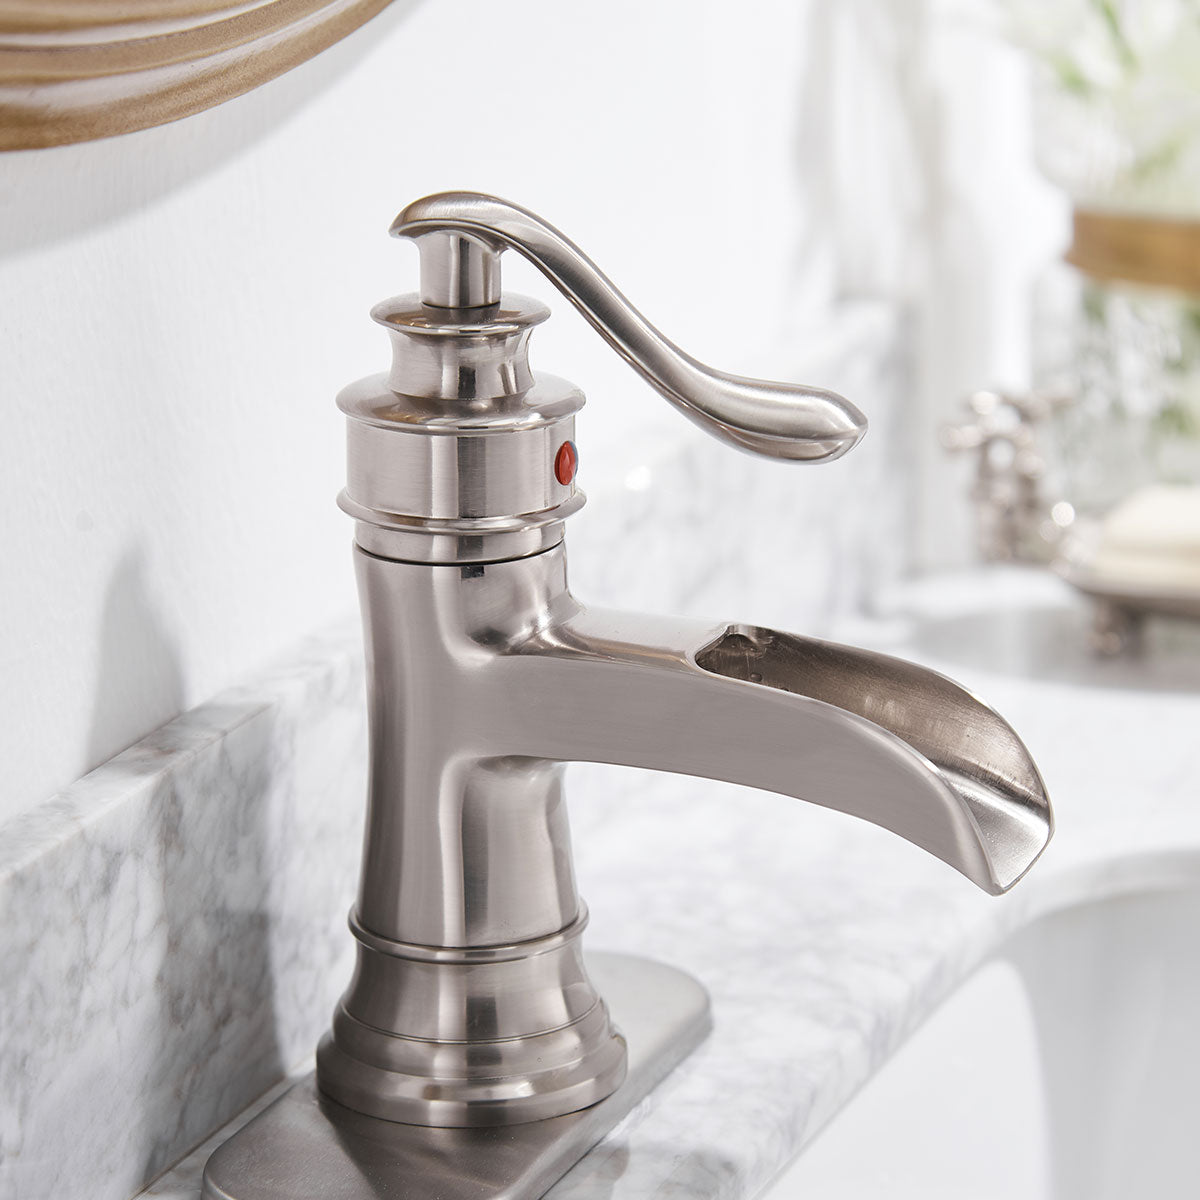 Sleek Stylish Single-Hole Single Handle Bathroom Faucet with Drain Kit Included in Brushed Nickel